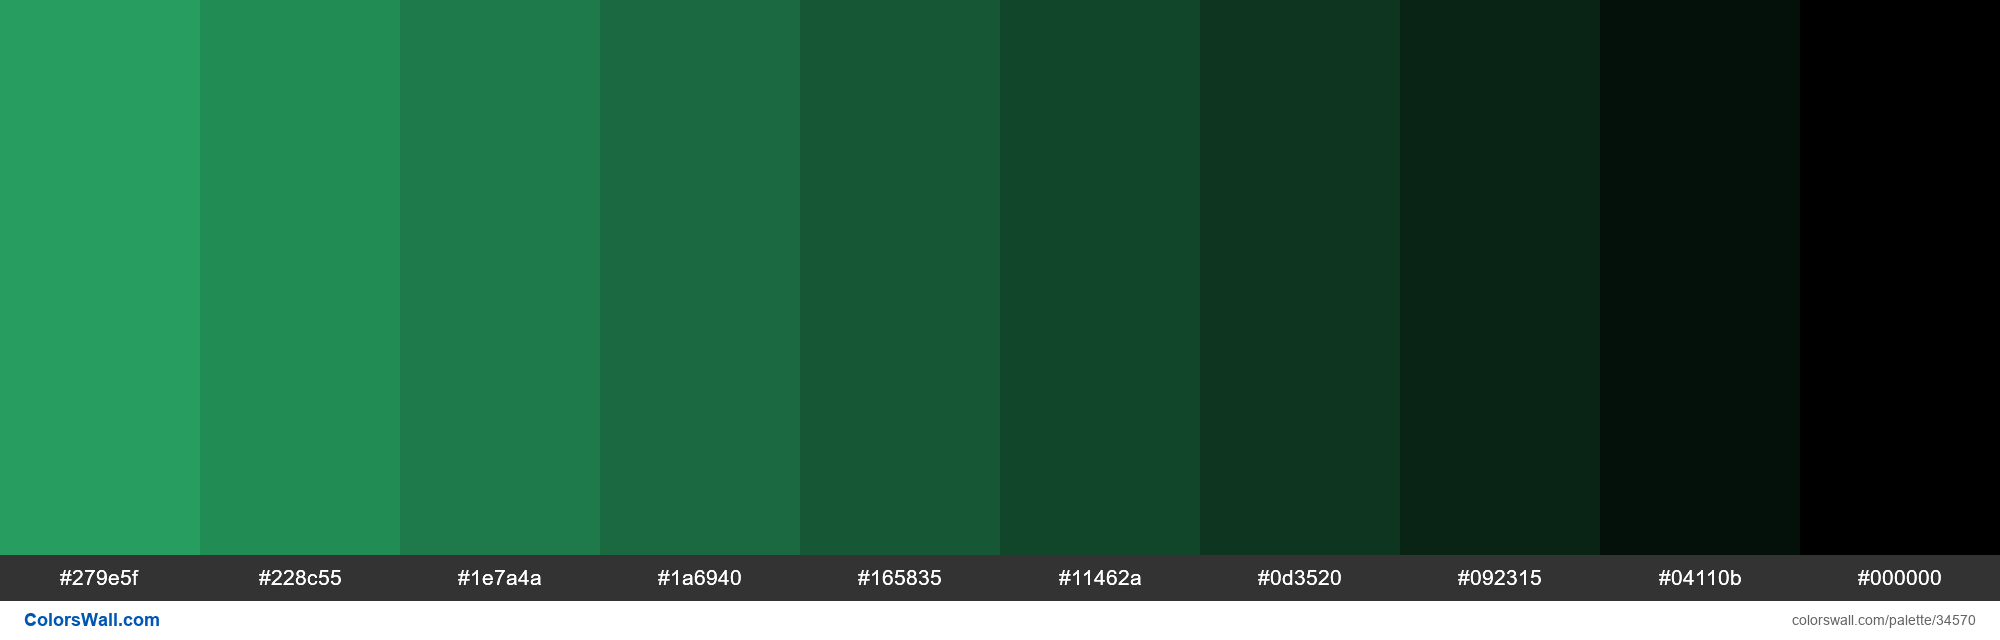 Shades XKCD Color jade green #2baf6a hex colors palette - ColorsWall